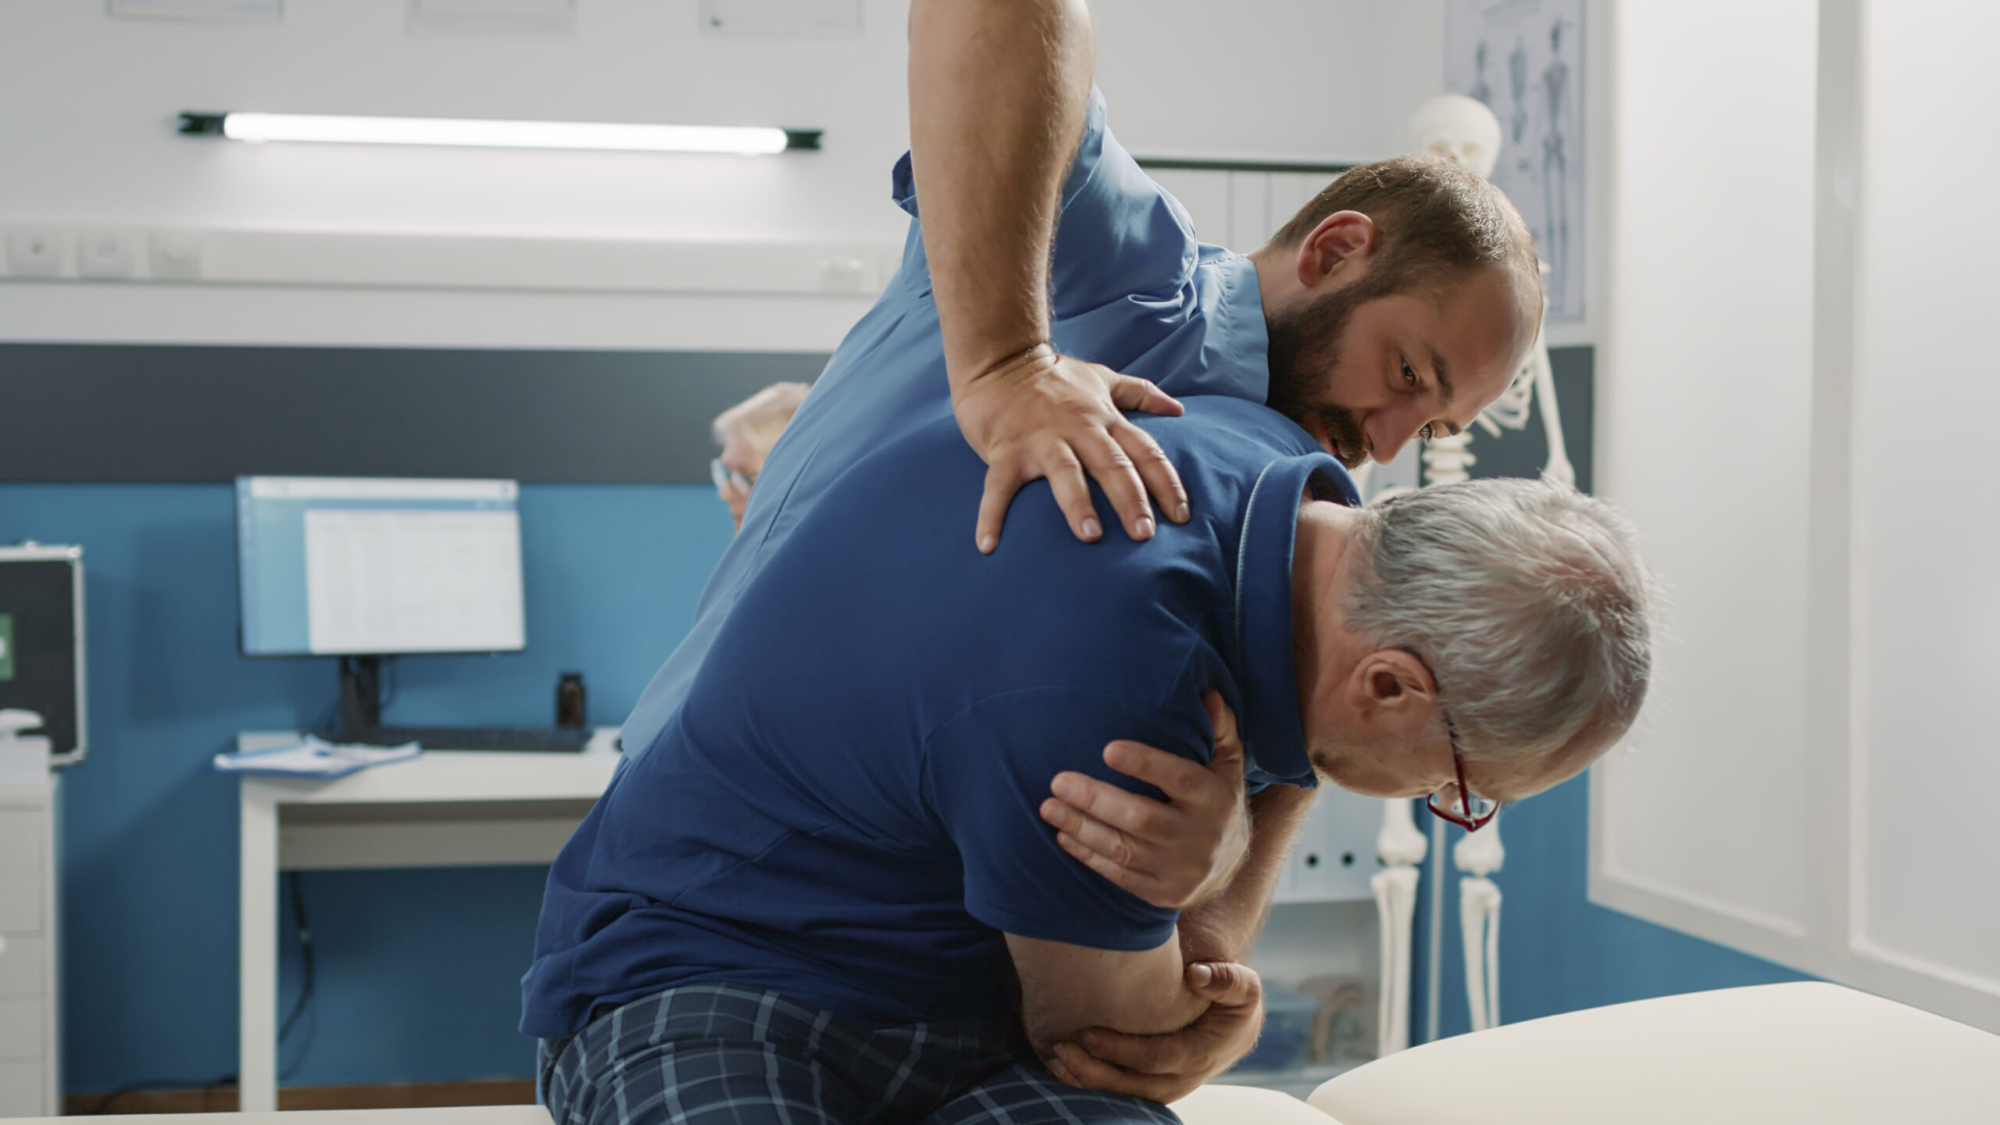 Osteopath helping senior man to crack back bones in cabinet, doing physical therapy exercise. Male assistant using physiotherapy procedure to increase mobility and treat patient.